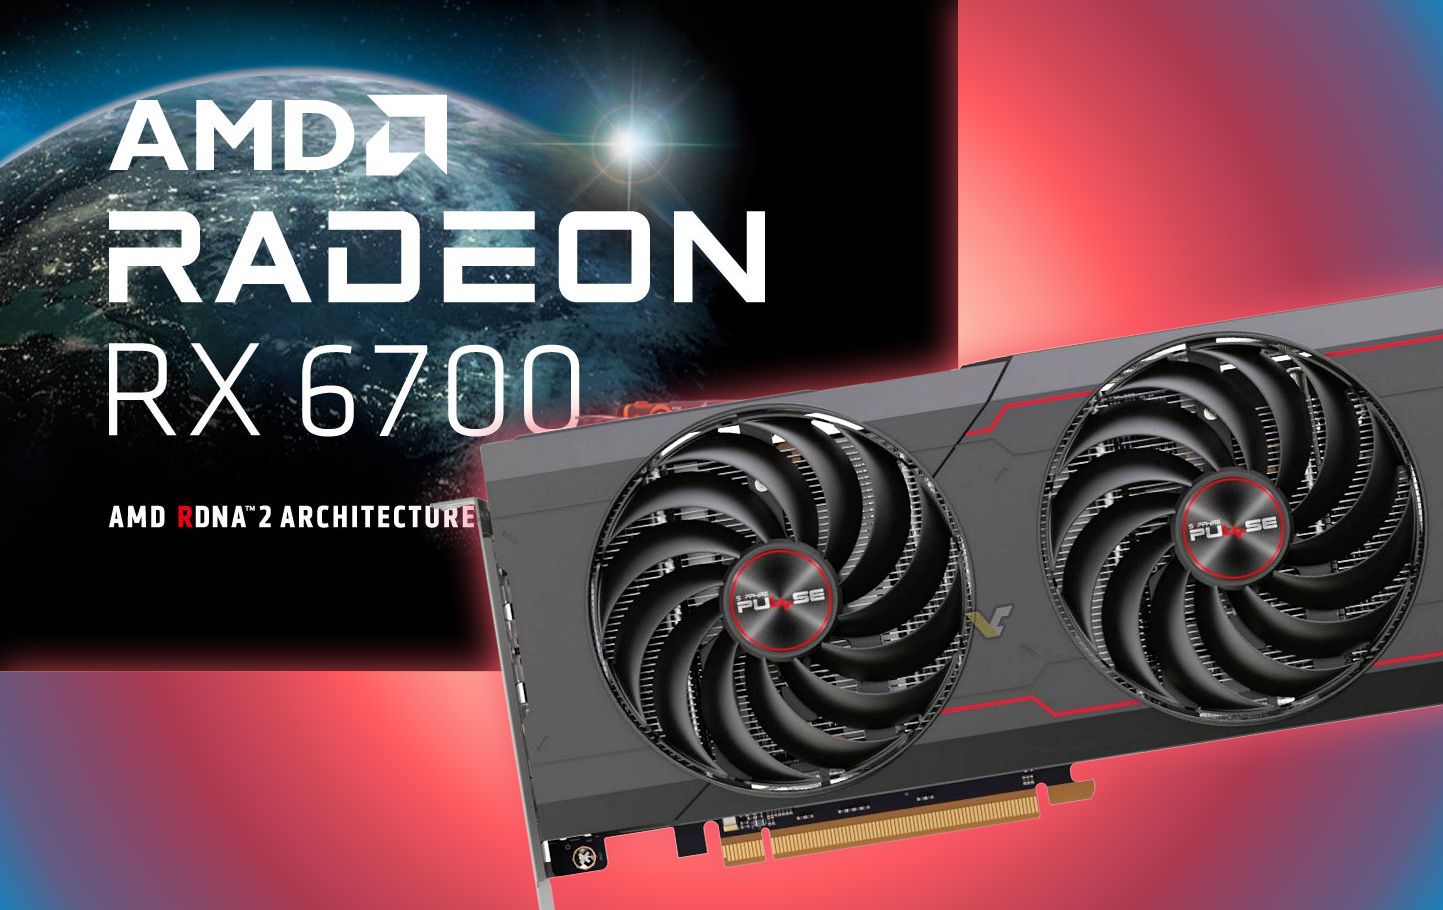 Sapphire Radeon RX 6700 non-XT shows up in Europe with €380 price tag 